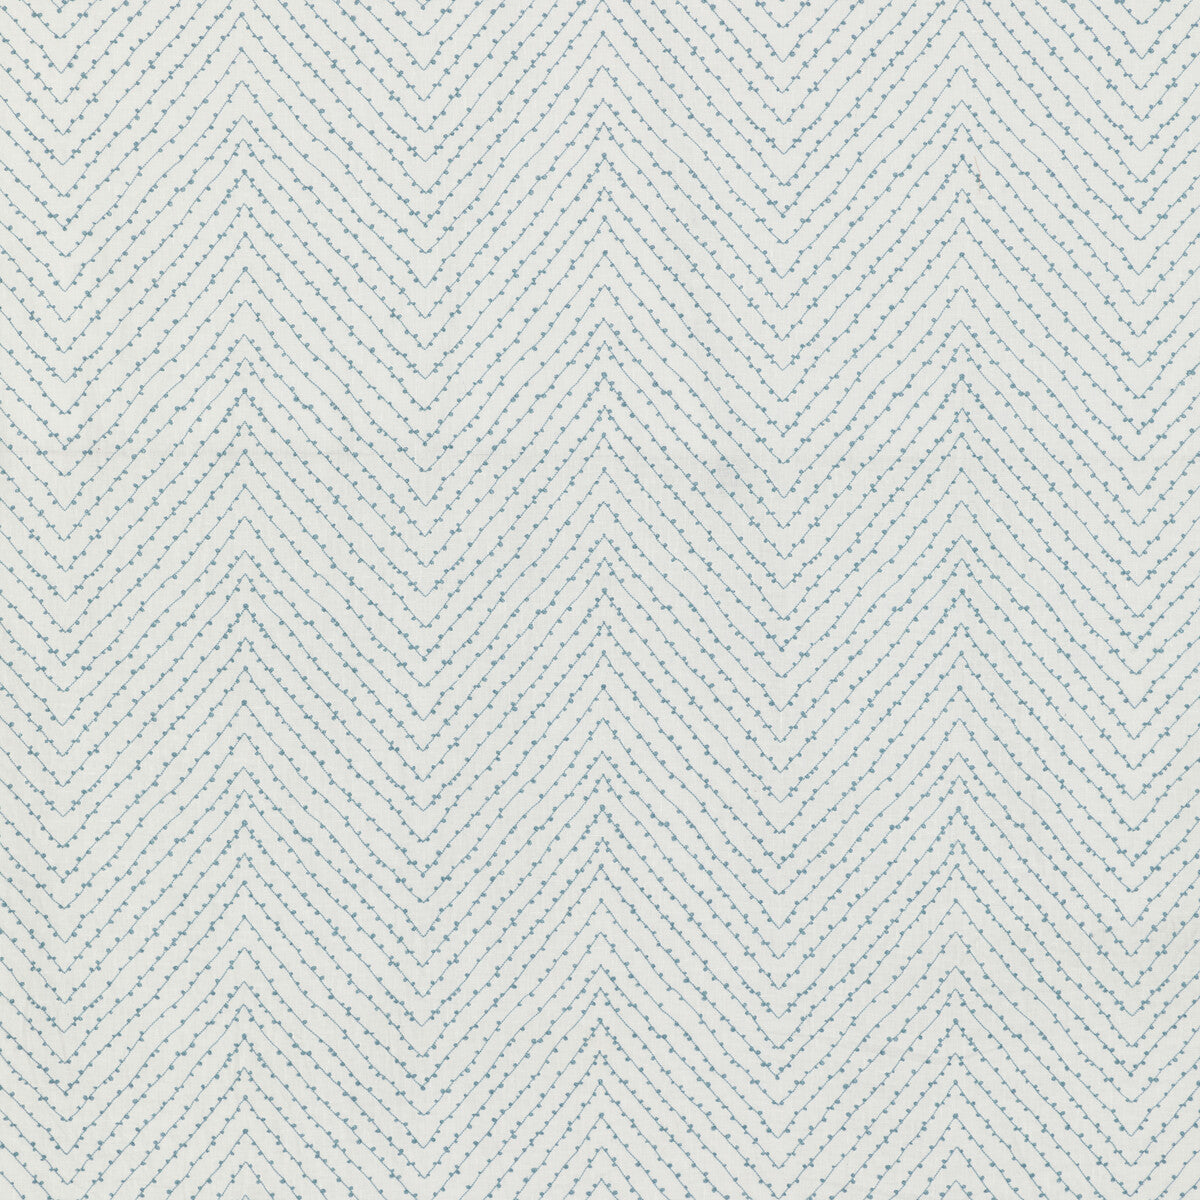 Stringknot fabric in horizon color - pattern 4851.15.0 - by Kravet Basics in the Monterey collection